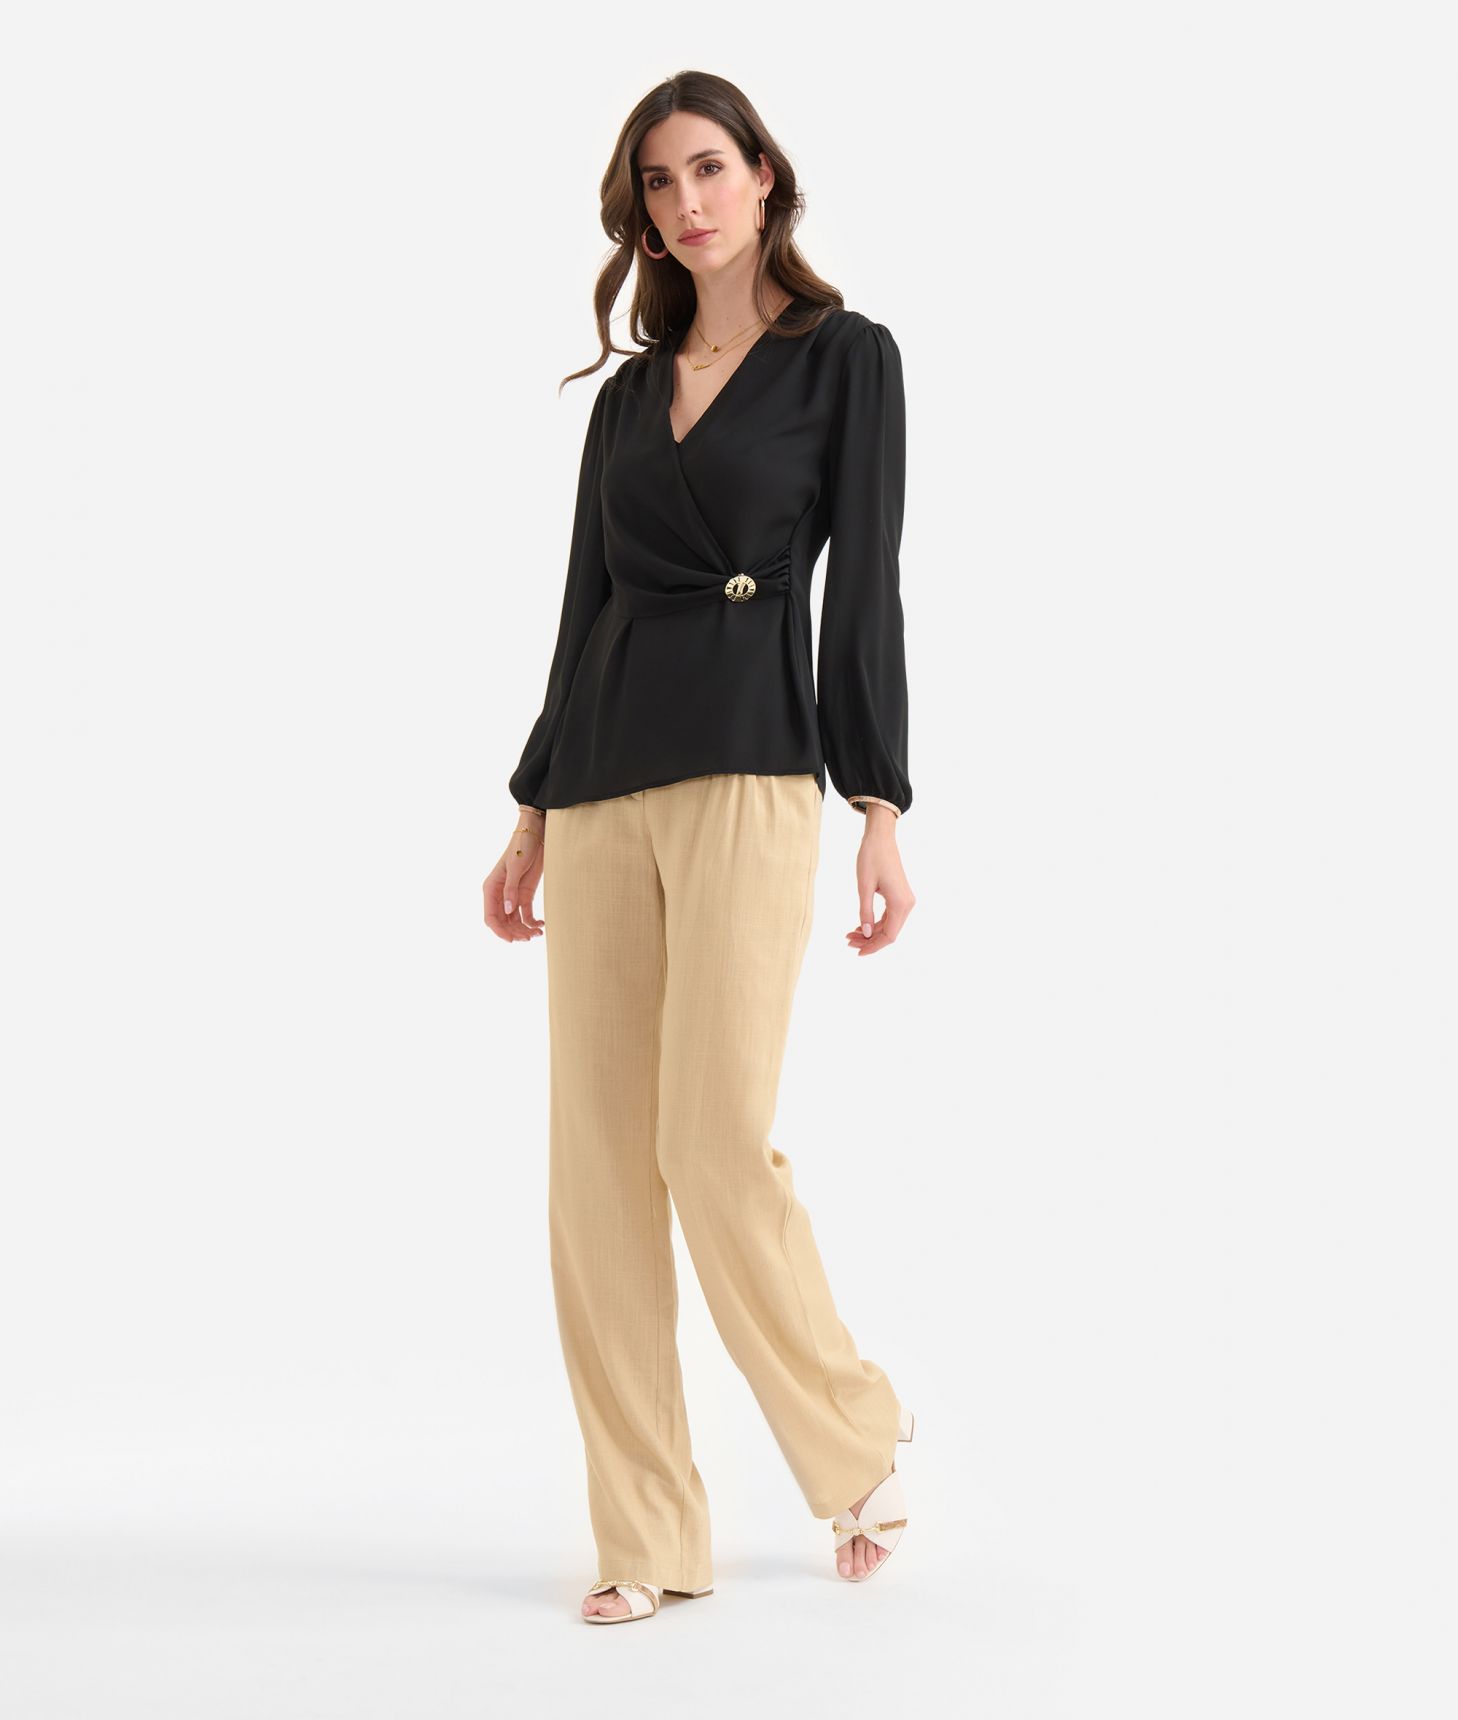 Crêpe de chine blouse with brooch Black,front